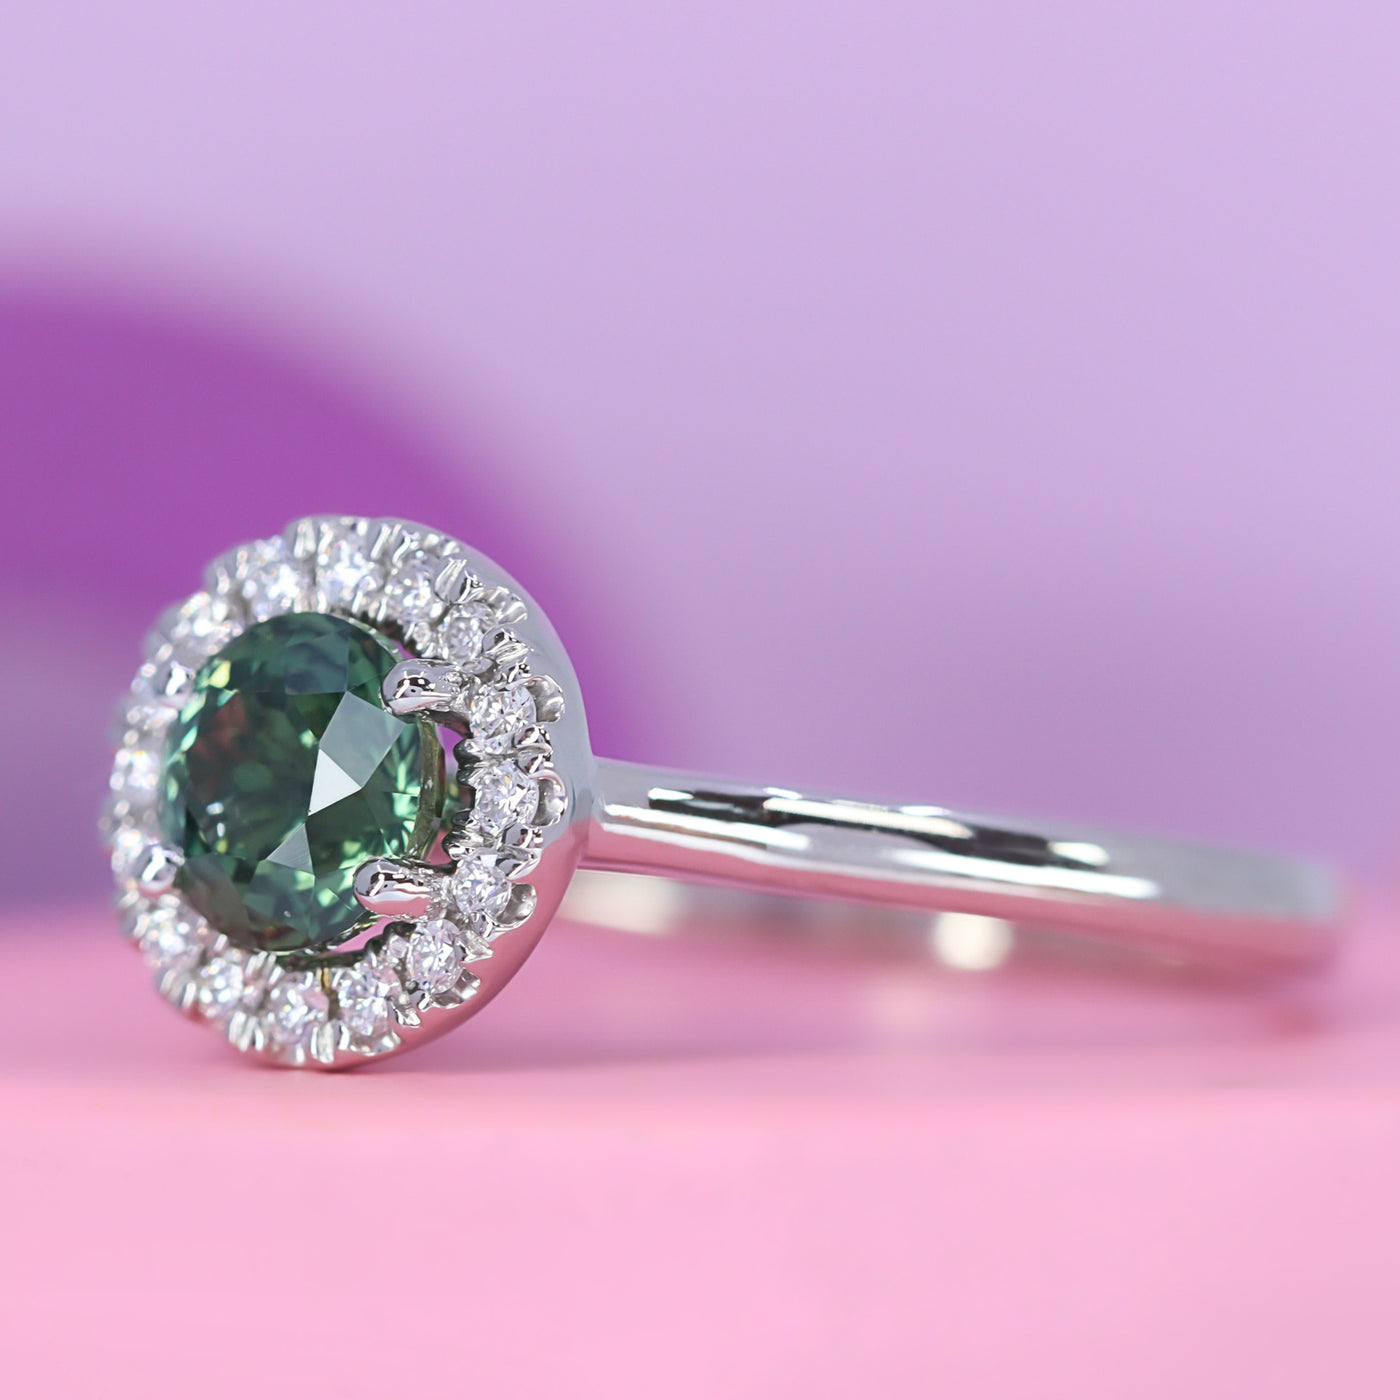 April - Round Teal Sapphire and Round Brilliant Cut Halo Engagement Ring - Custom Made-to-Order Design